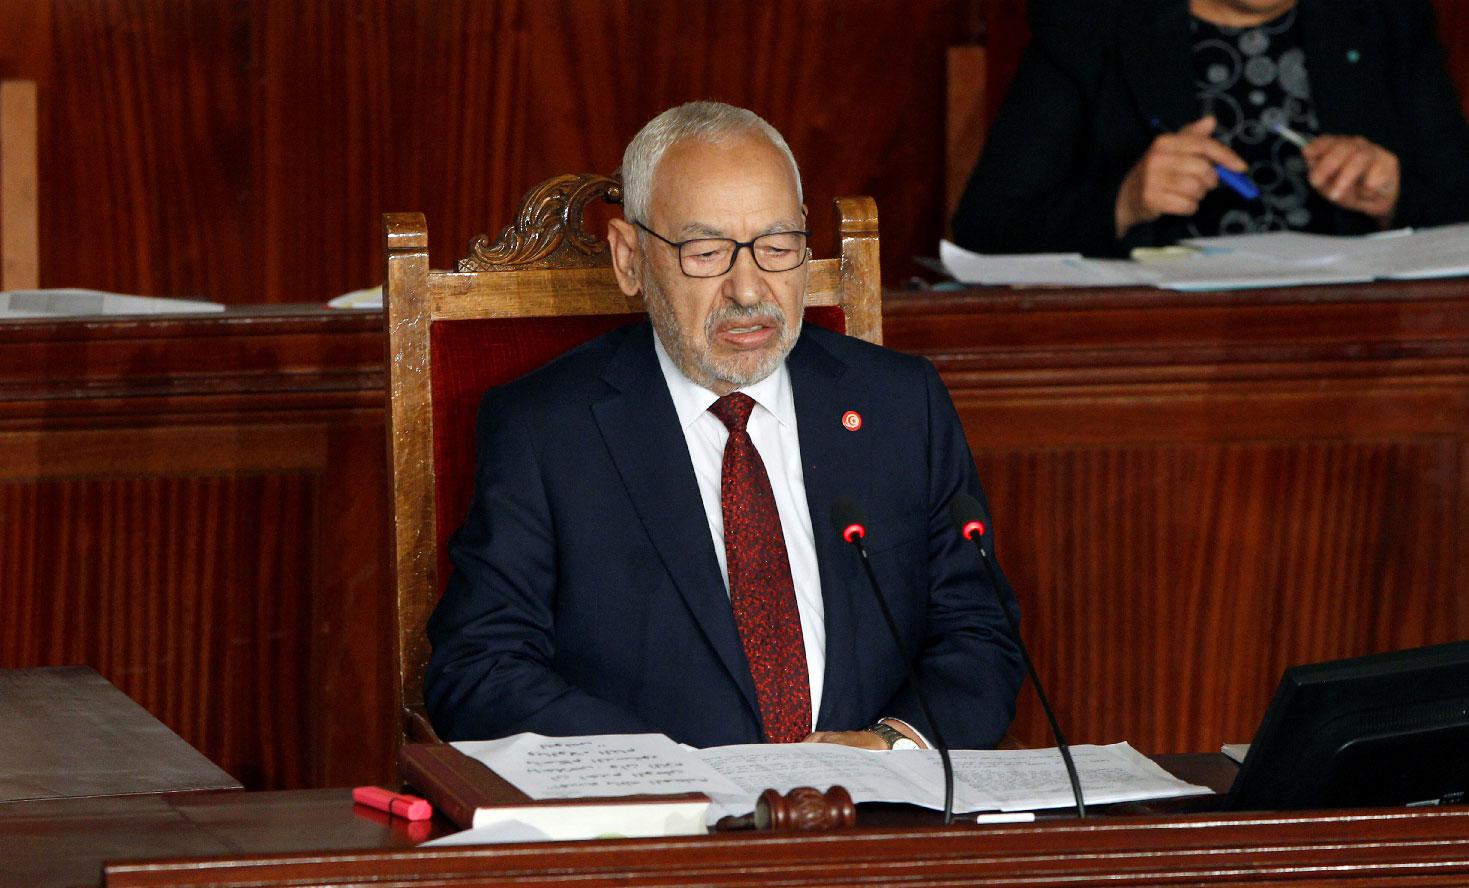 Rached Ghannouchi attends the parliament's opening with a session to elect a speaker